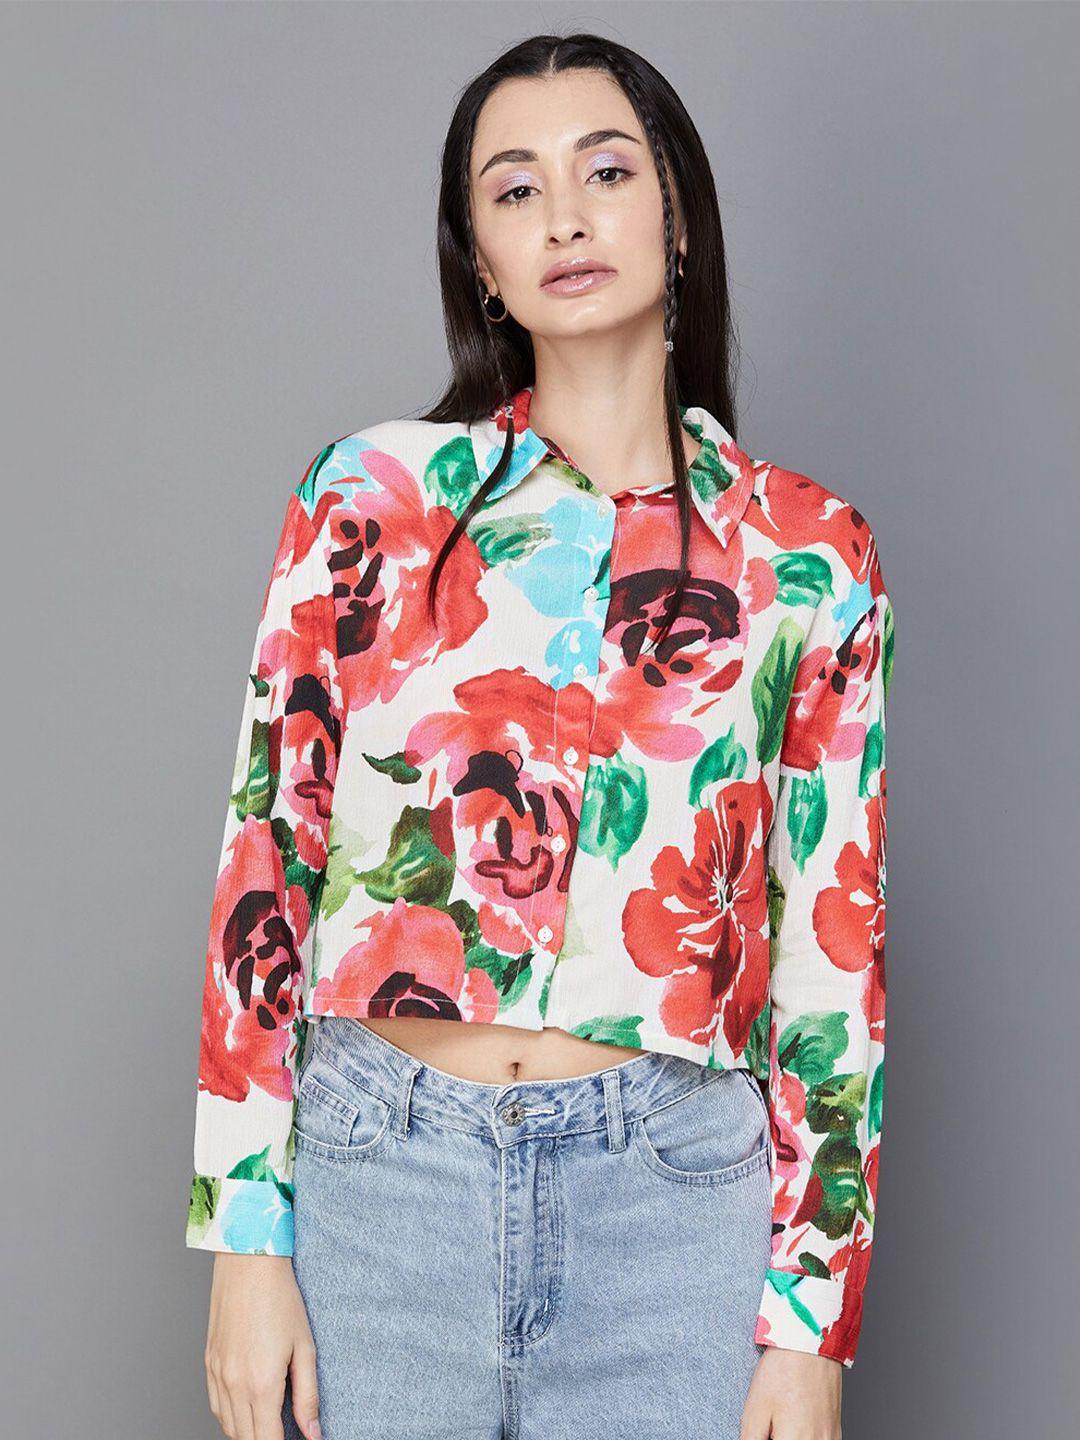 ginger-by-lifestyle-floral-printed-casula-shirt